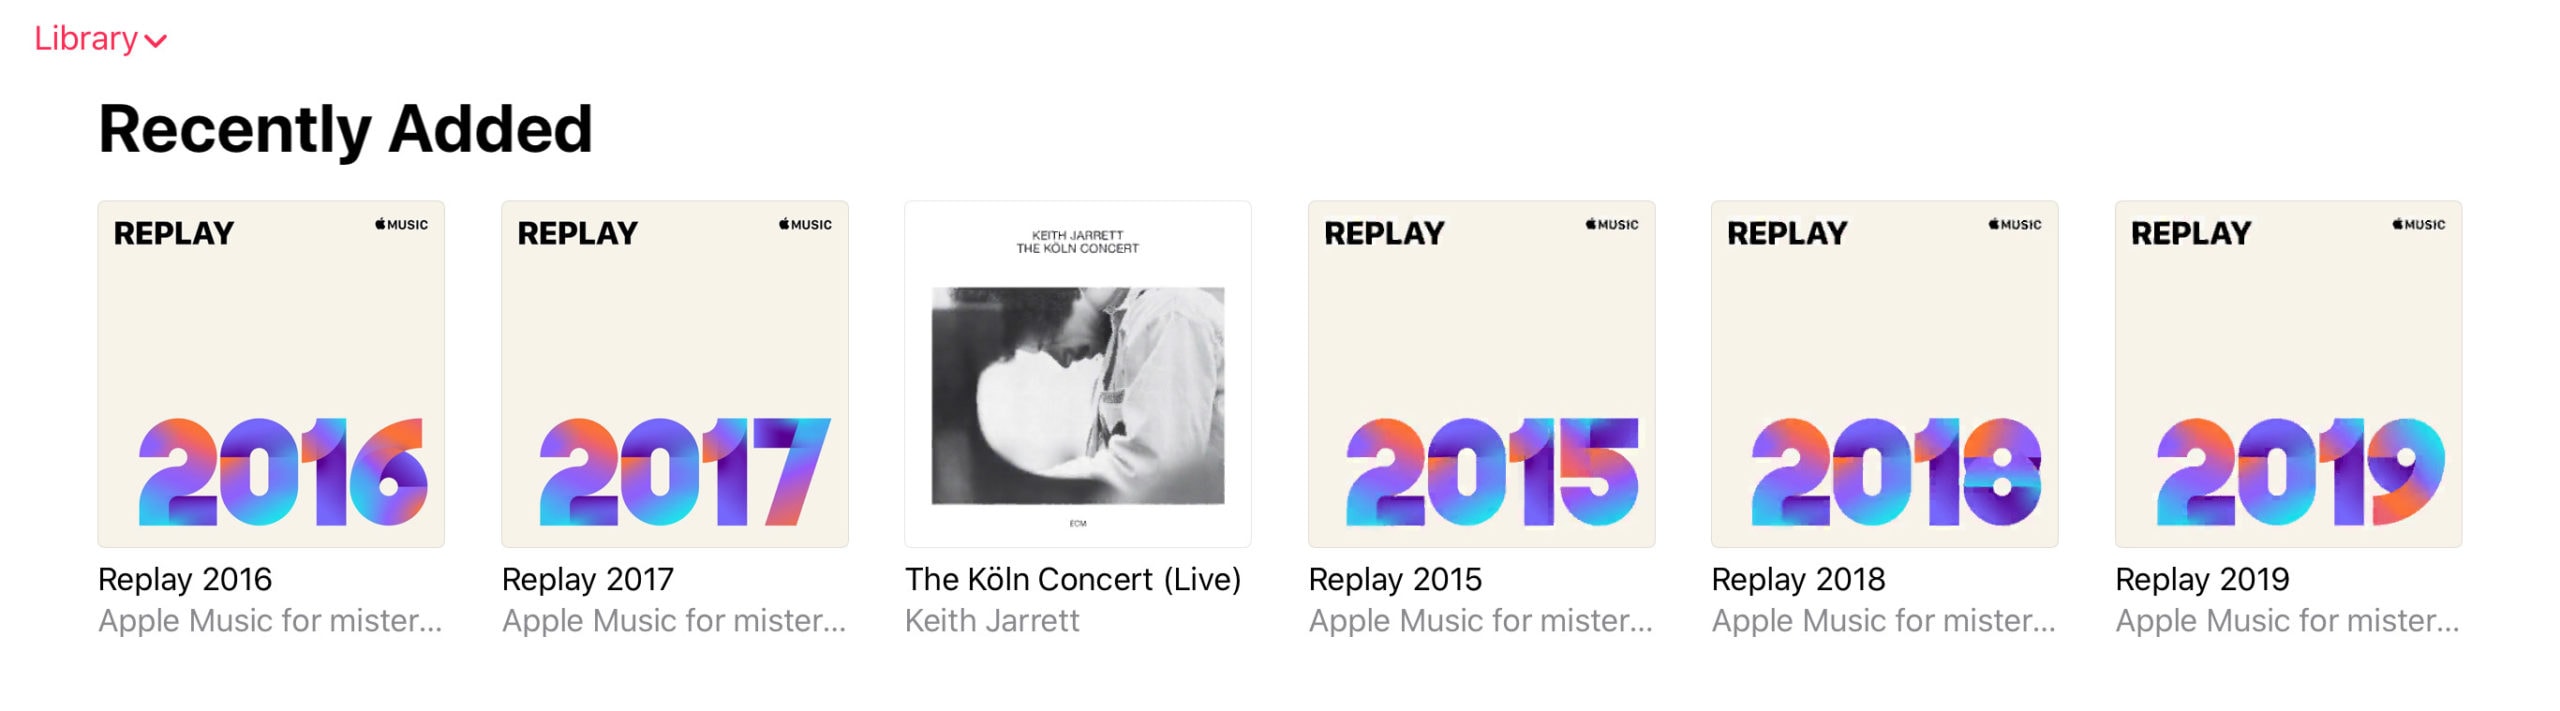 Playlists stretching back to 2015.